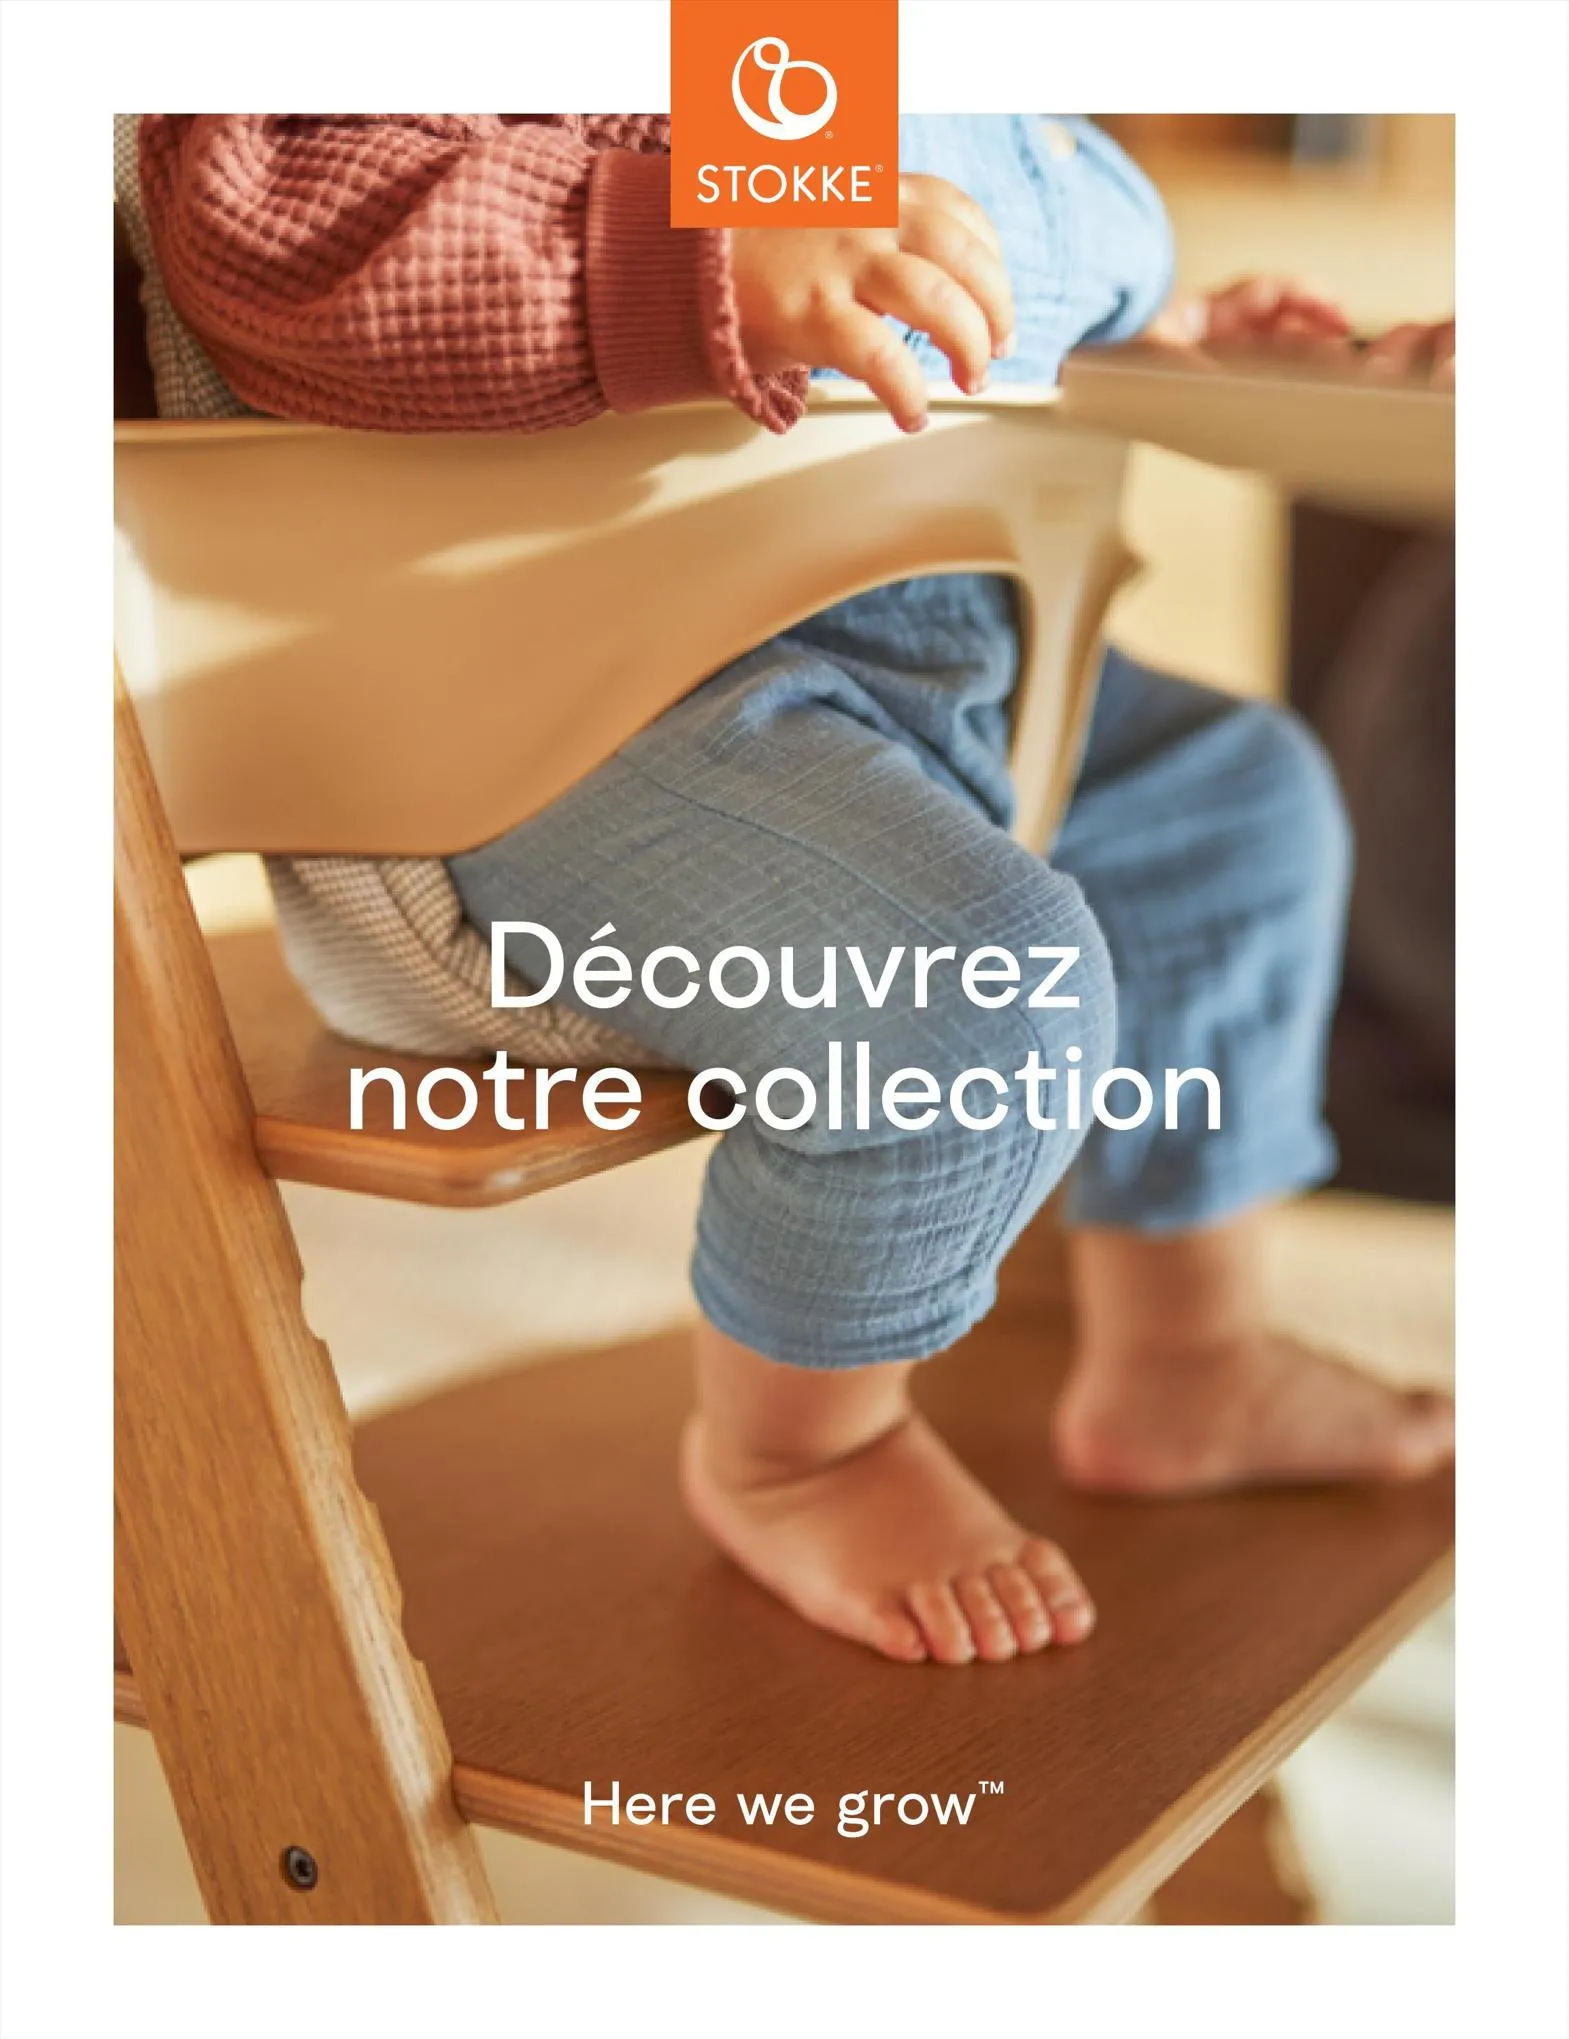 Catalogue Stokke Consumer Guide - French (CH), page 00001